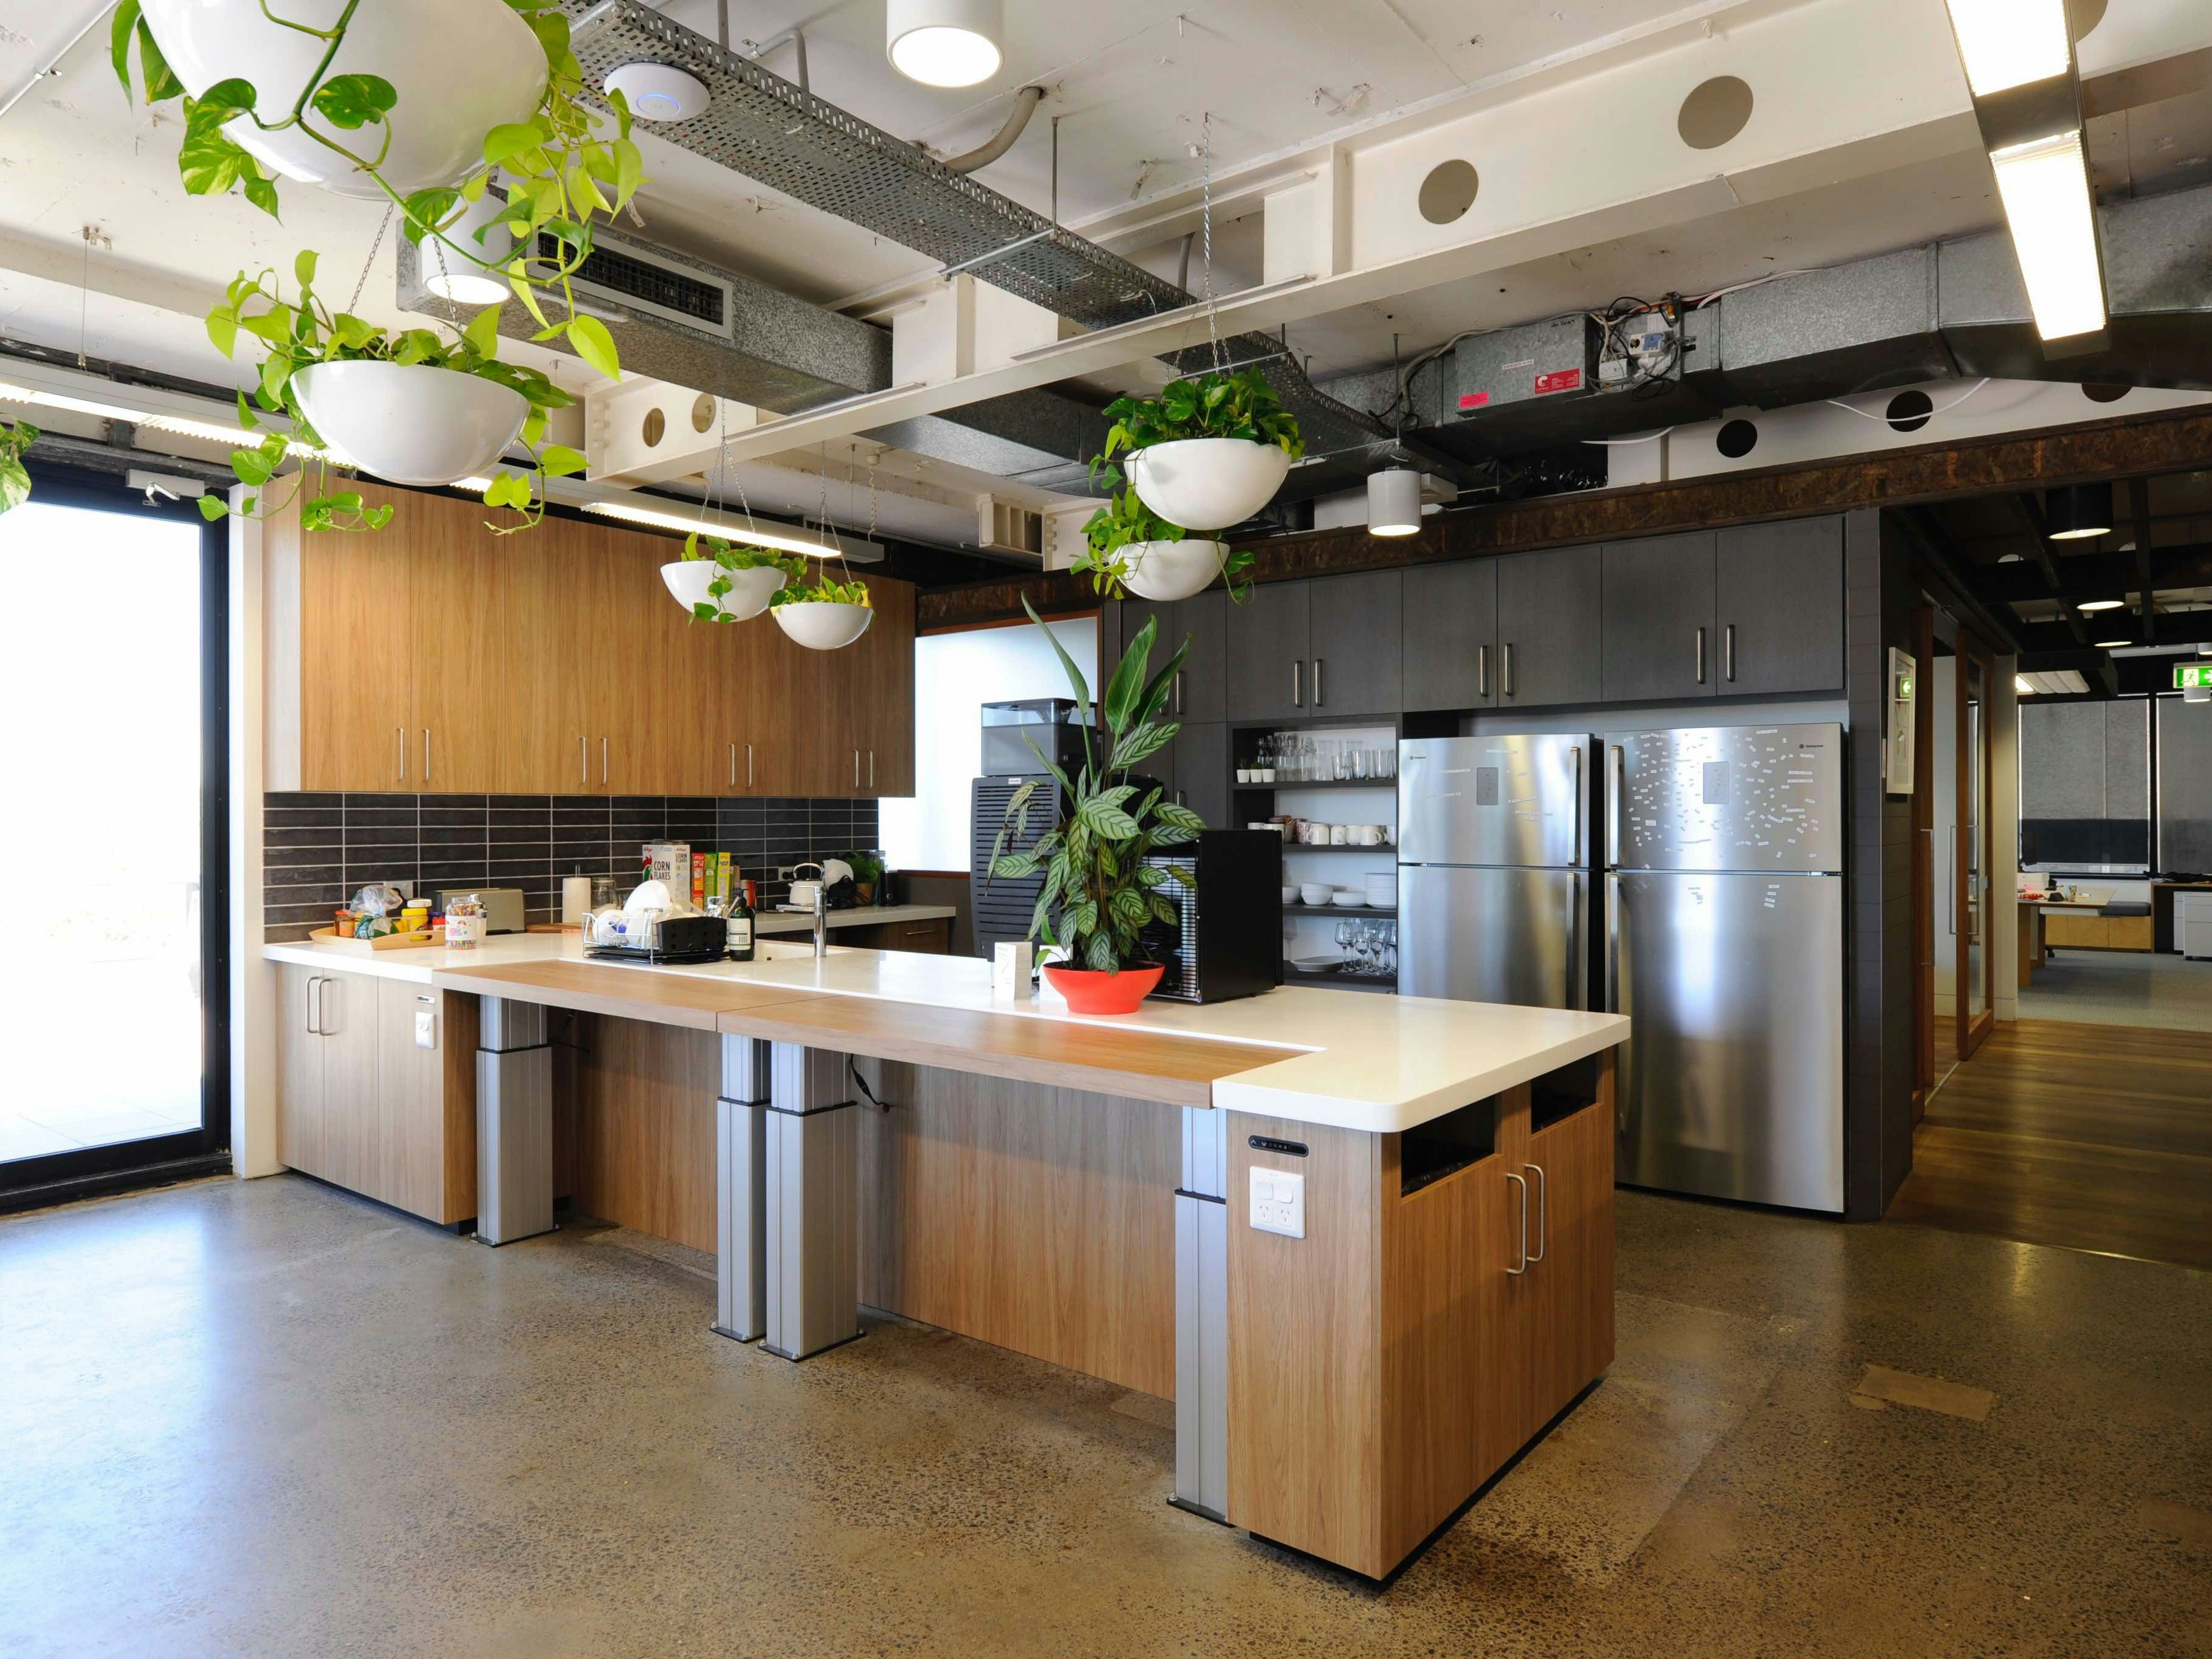 Hireup&#8217;s office features accessible kitchens complete with accessible kettles and microwaves and height adjustable benches [Source: Hireup]
